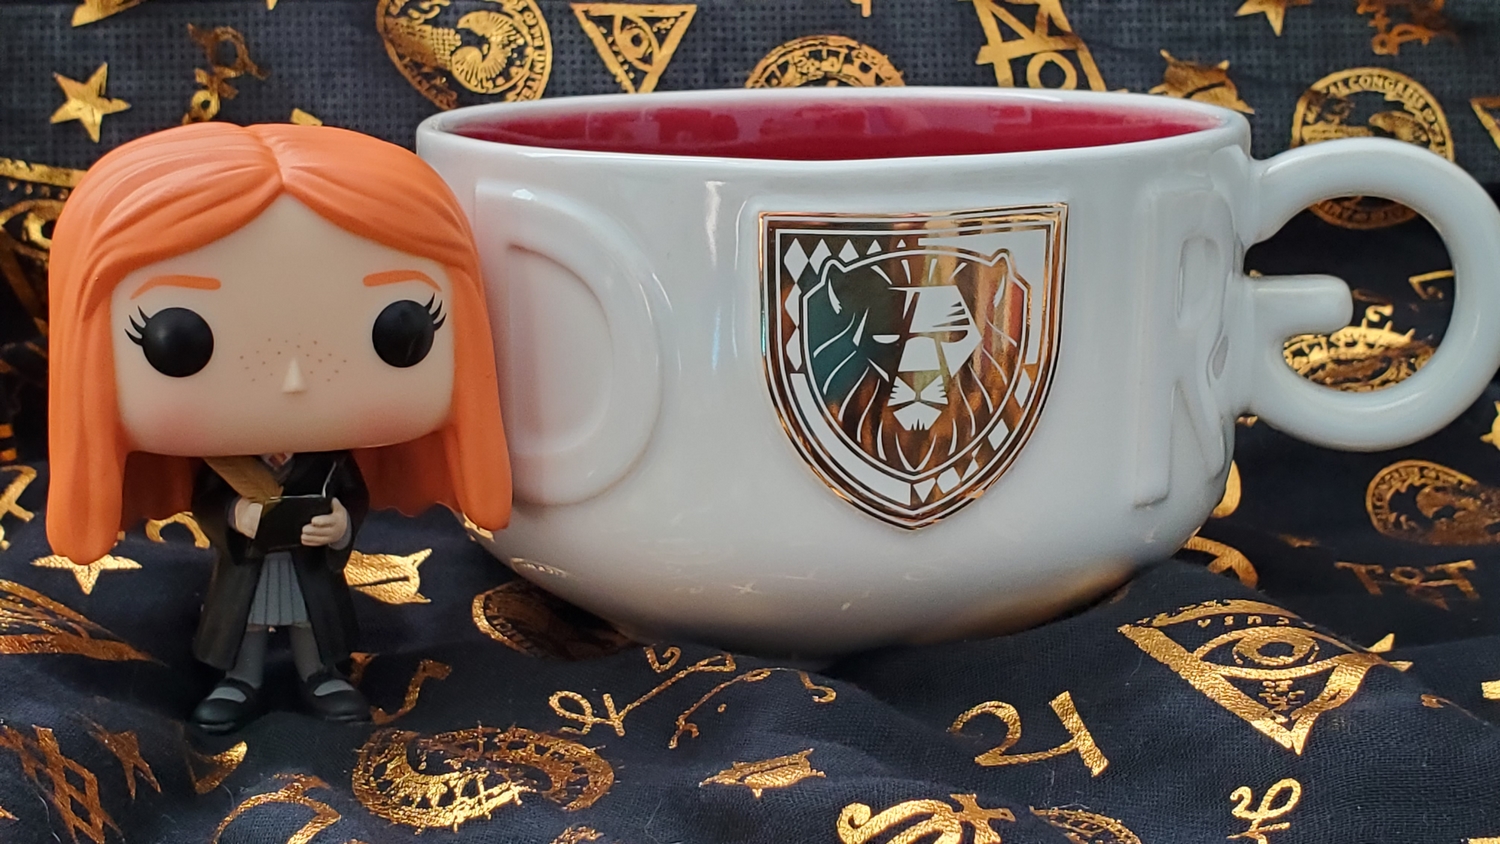 Harry Potter Soup Mug from Hallmark Gold Crown, featuring Ginny Weasley Funko POP!